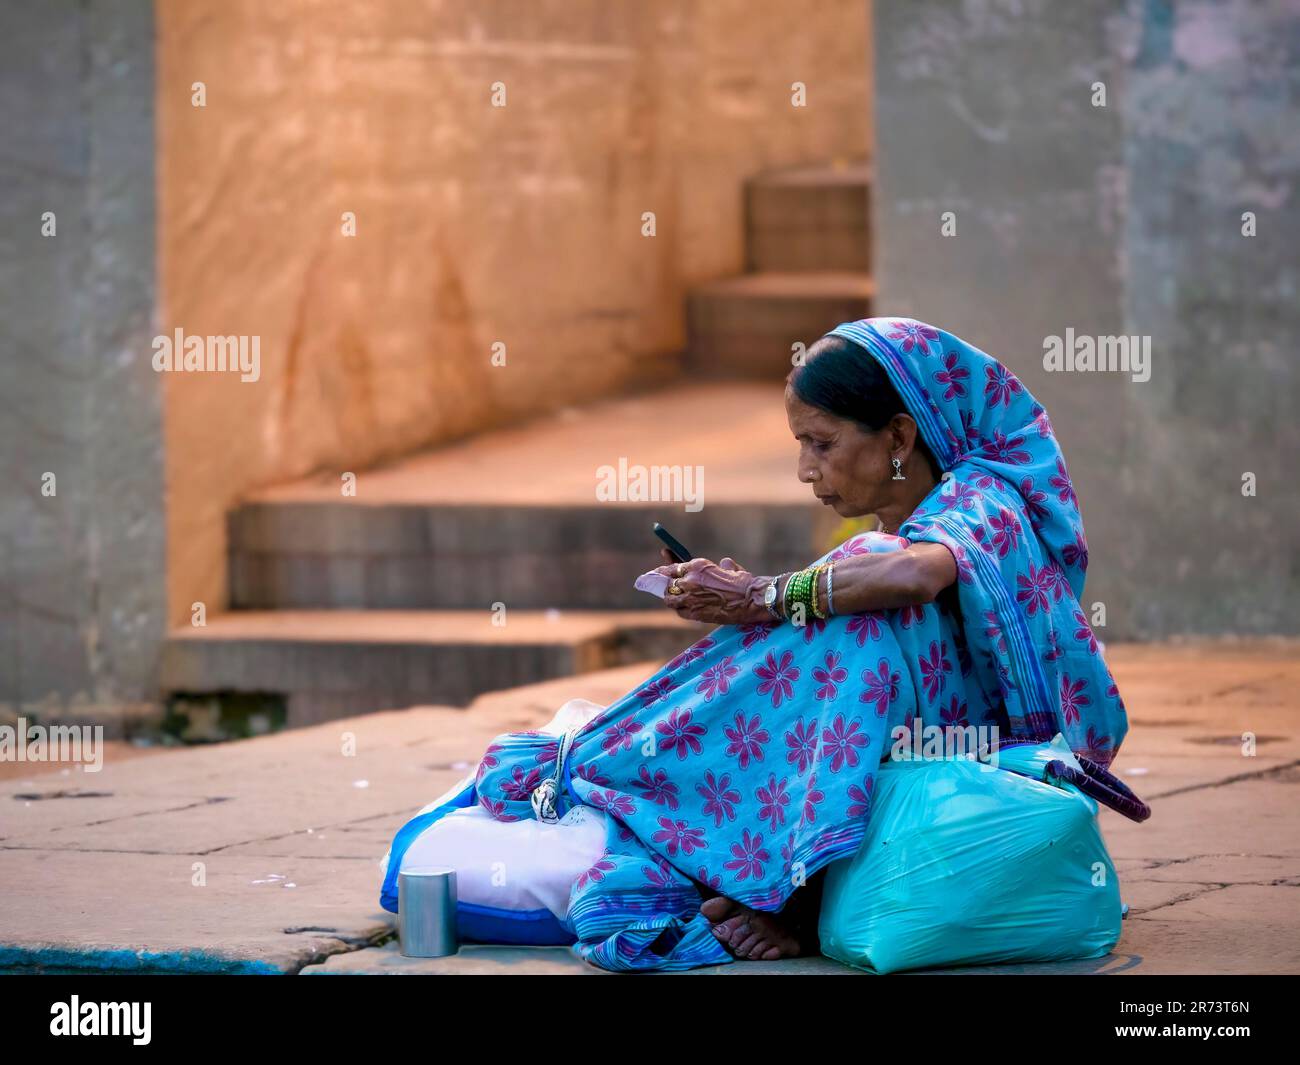 Varanasi, India - Nov 11, 2015. A senior Indian woman wearing a traditional sari and headscarf uses a cellphone while sitting outdoors. Stock Photo